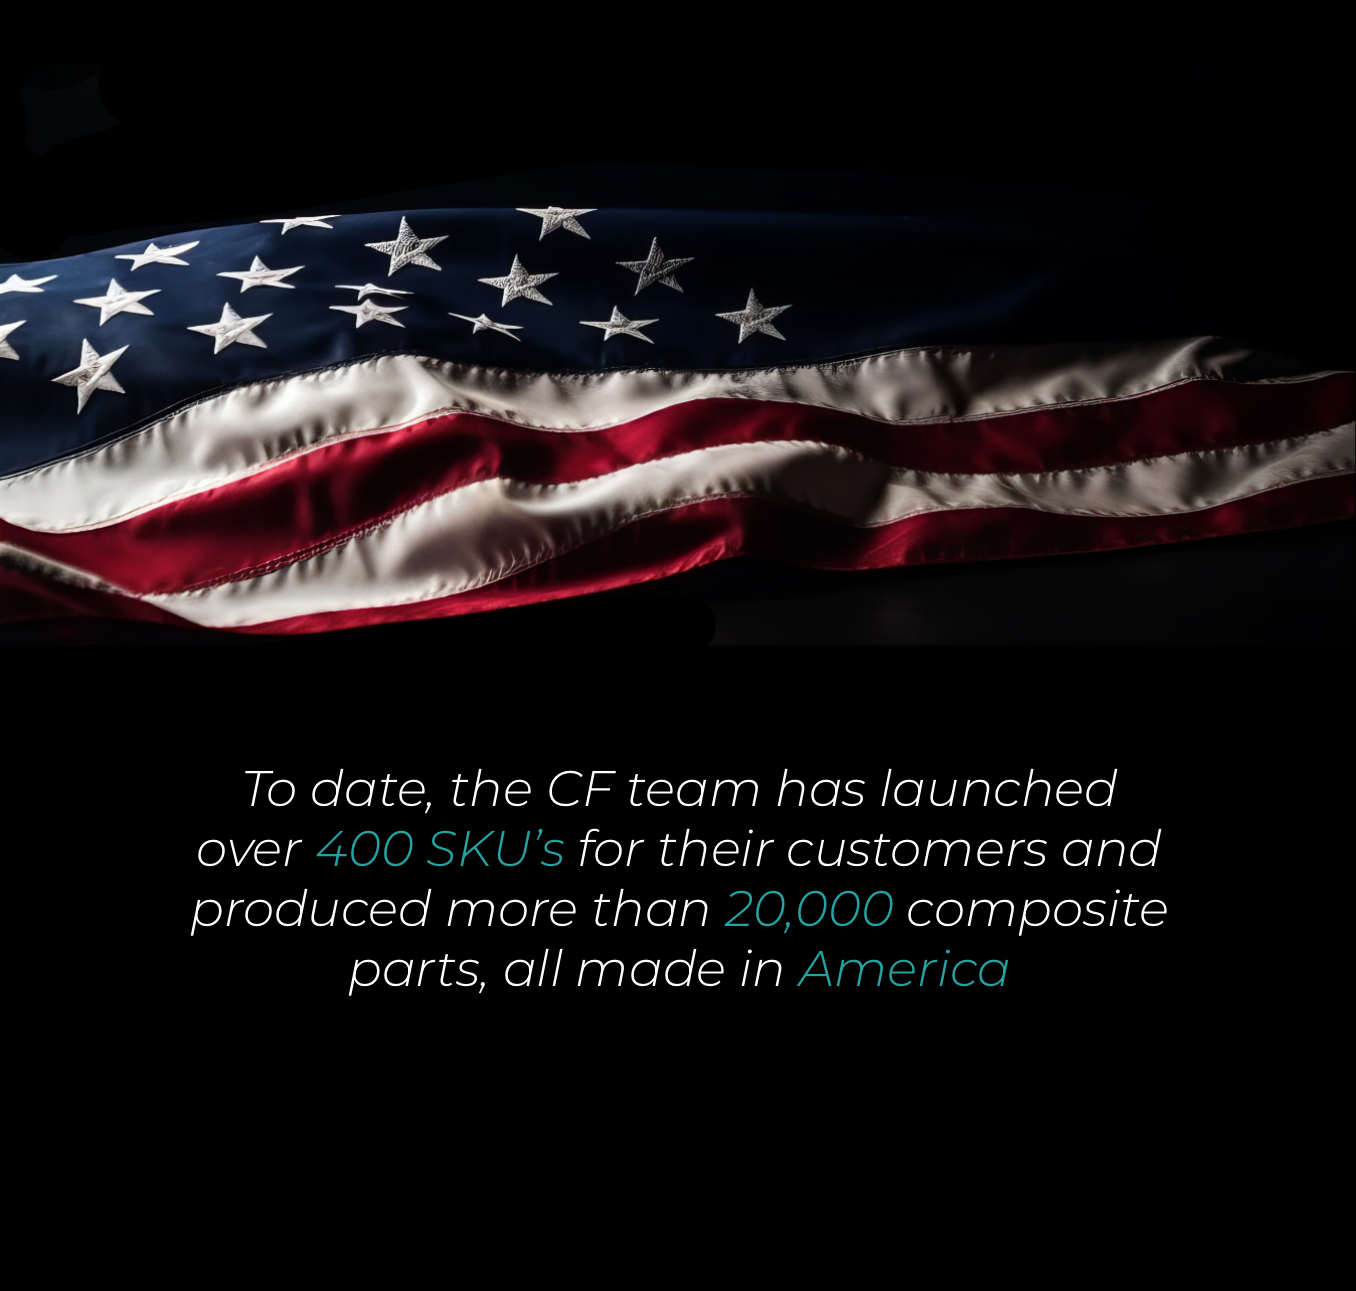 a photo of an American flag over the words "to date, the CF team has launched over 400 SKU's for their customers and produced more than 20,000 composite parts, all made in America."